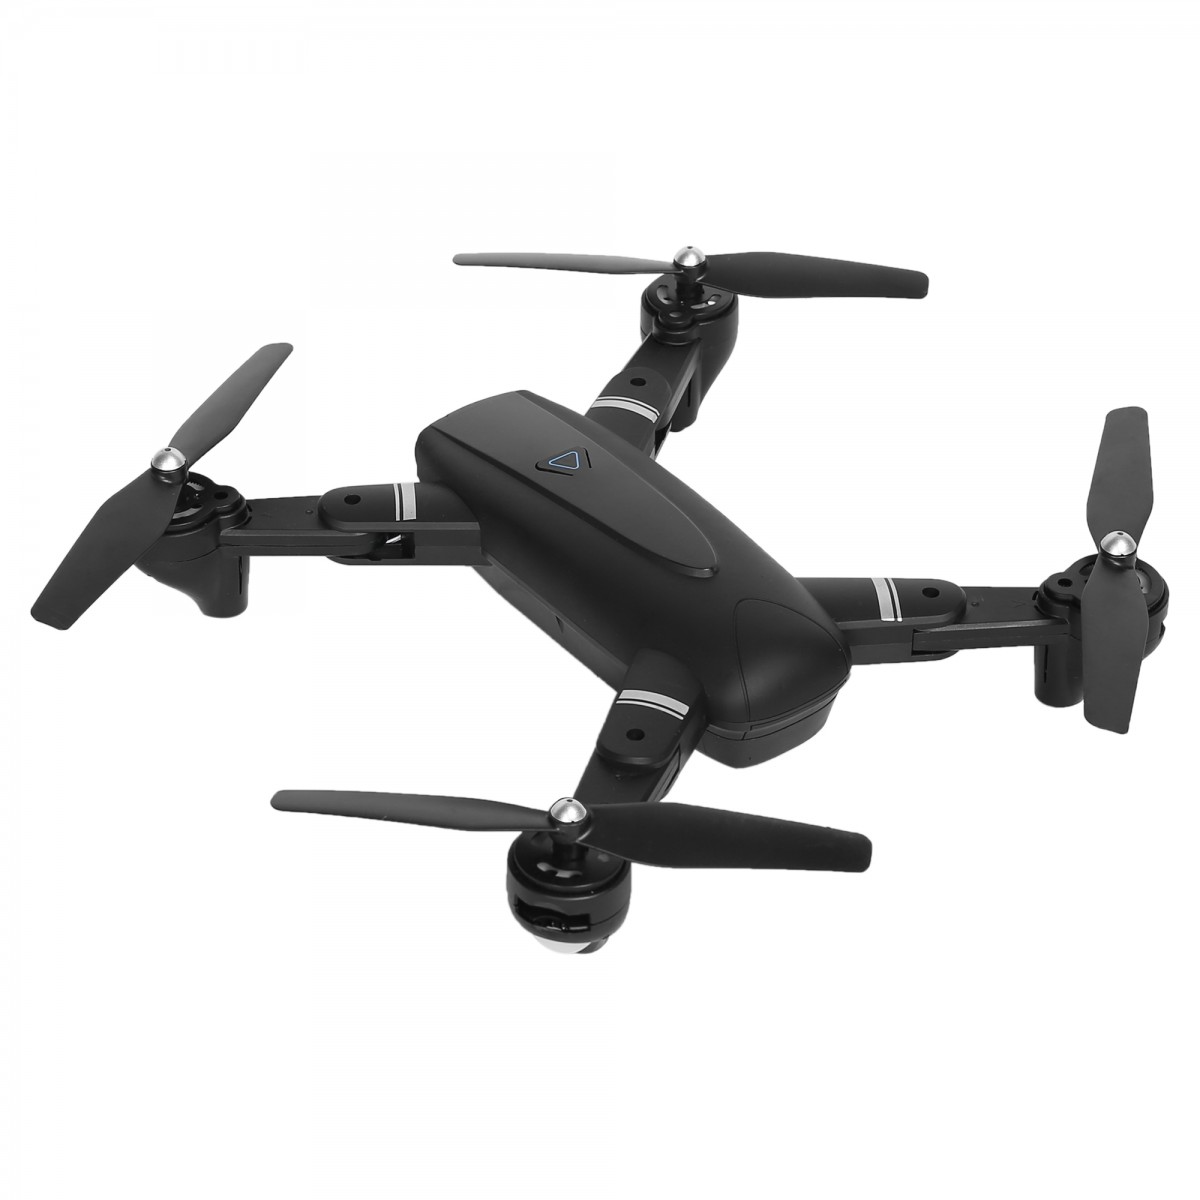 Ralleyz Dual Camera Drone With Altitude Hold Position Holding 1080P Camera Drone, Black, 14Y+